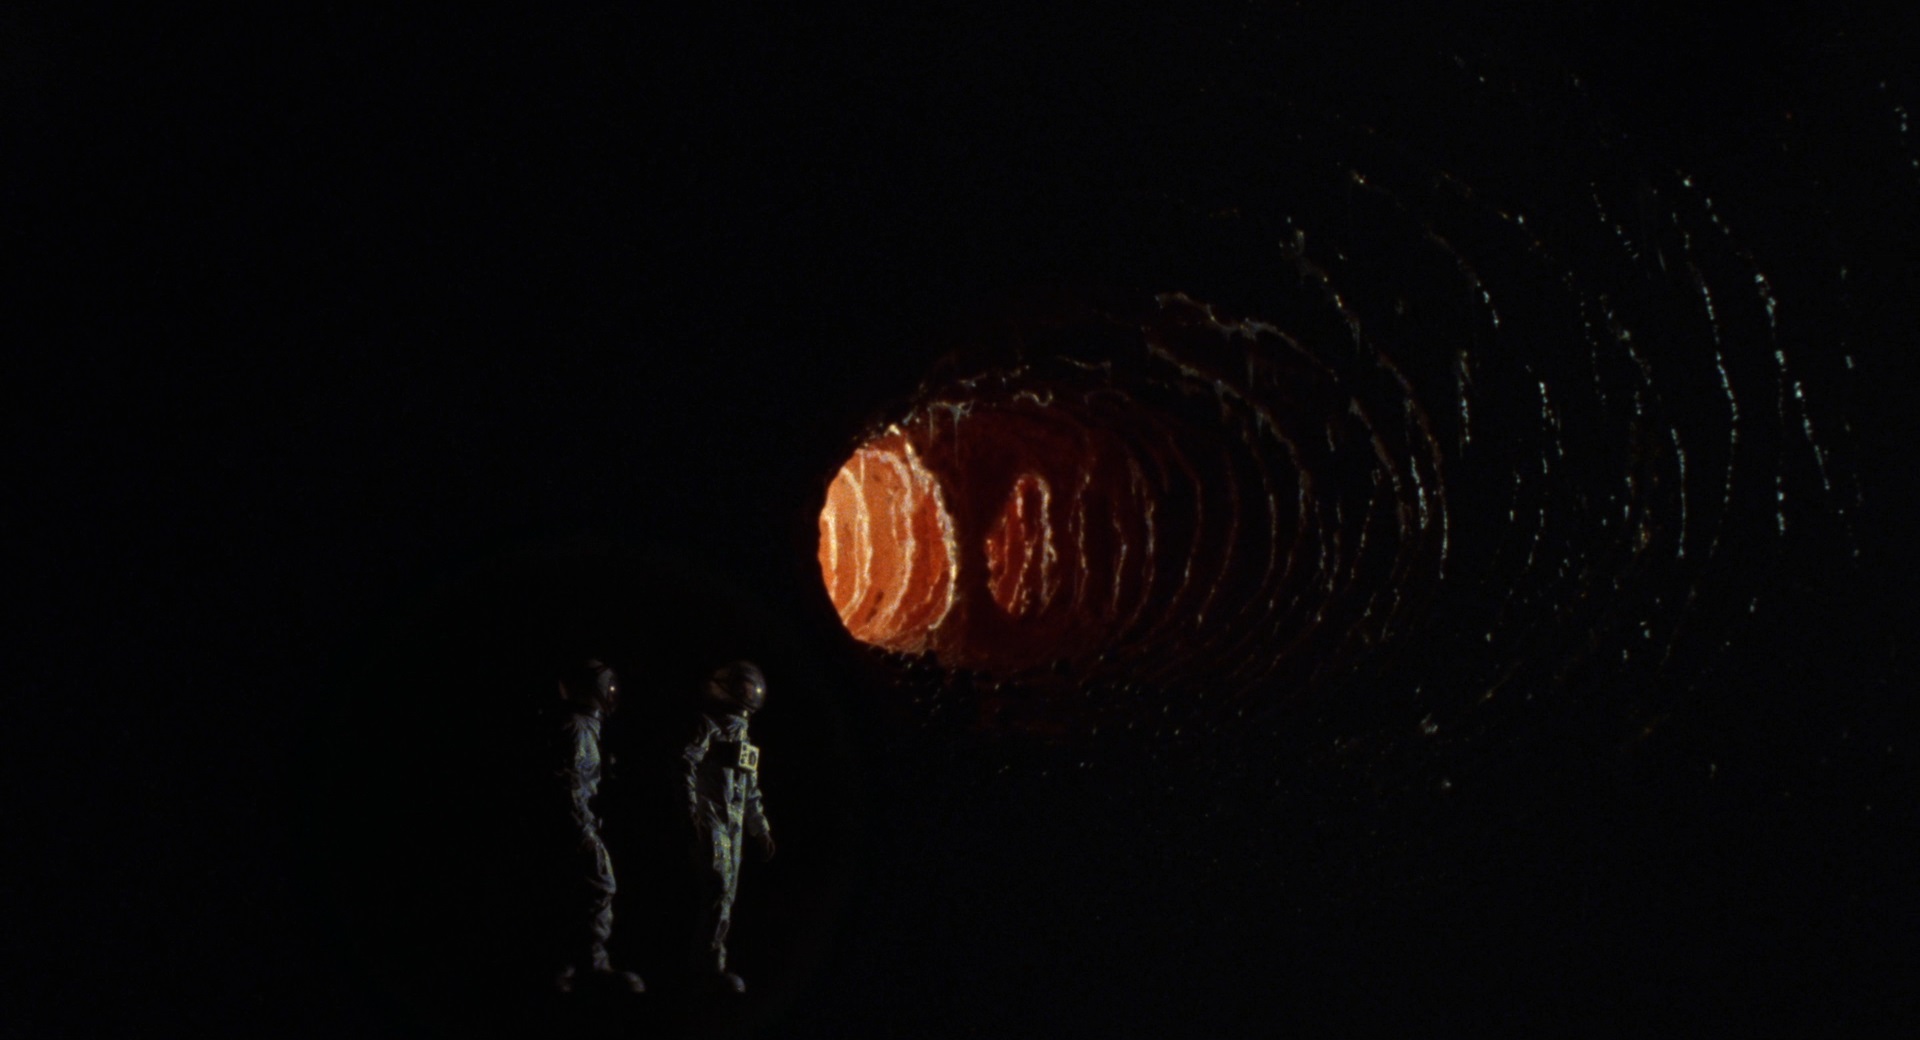 Exploring the caves on Mars in Alien Contamination (1980)